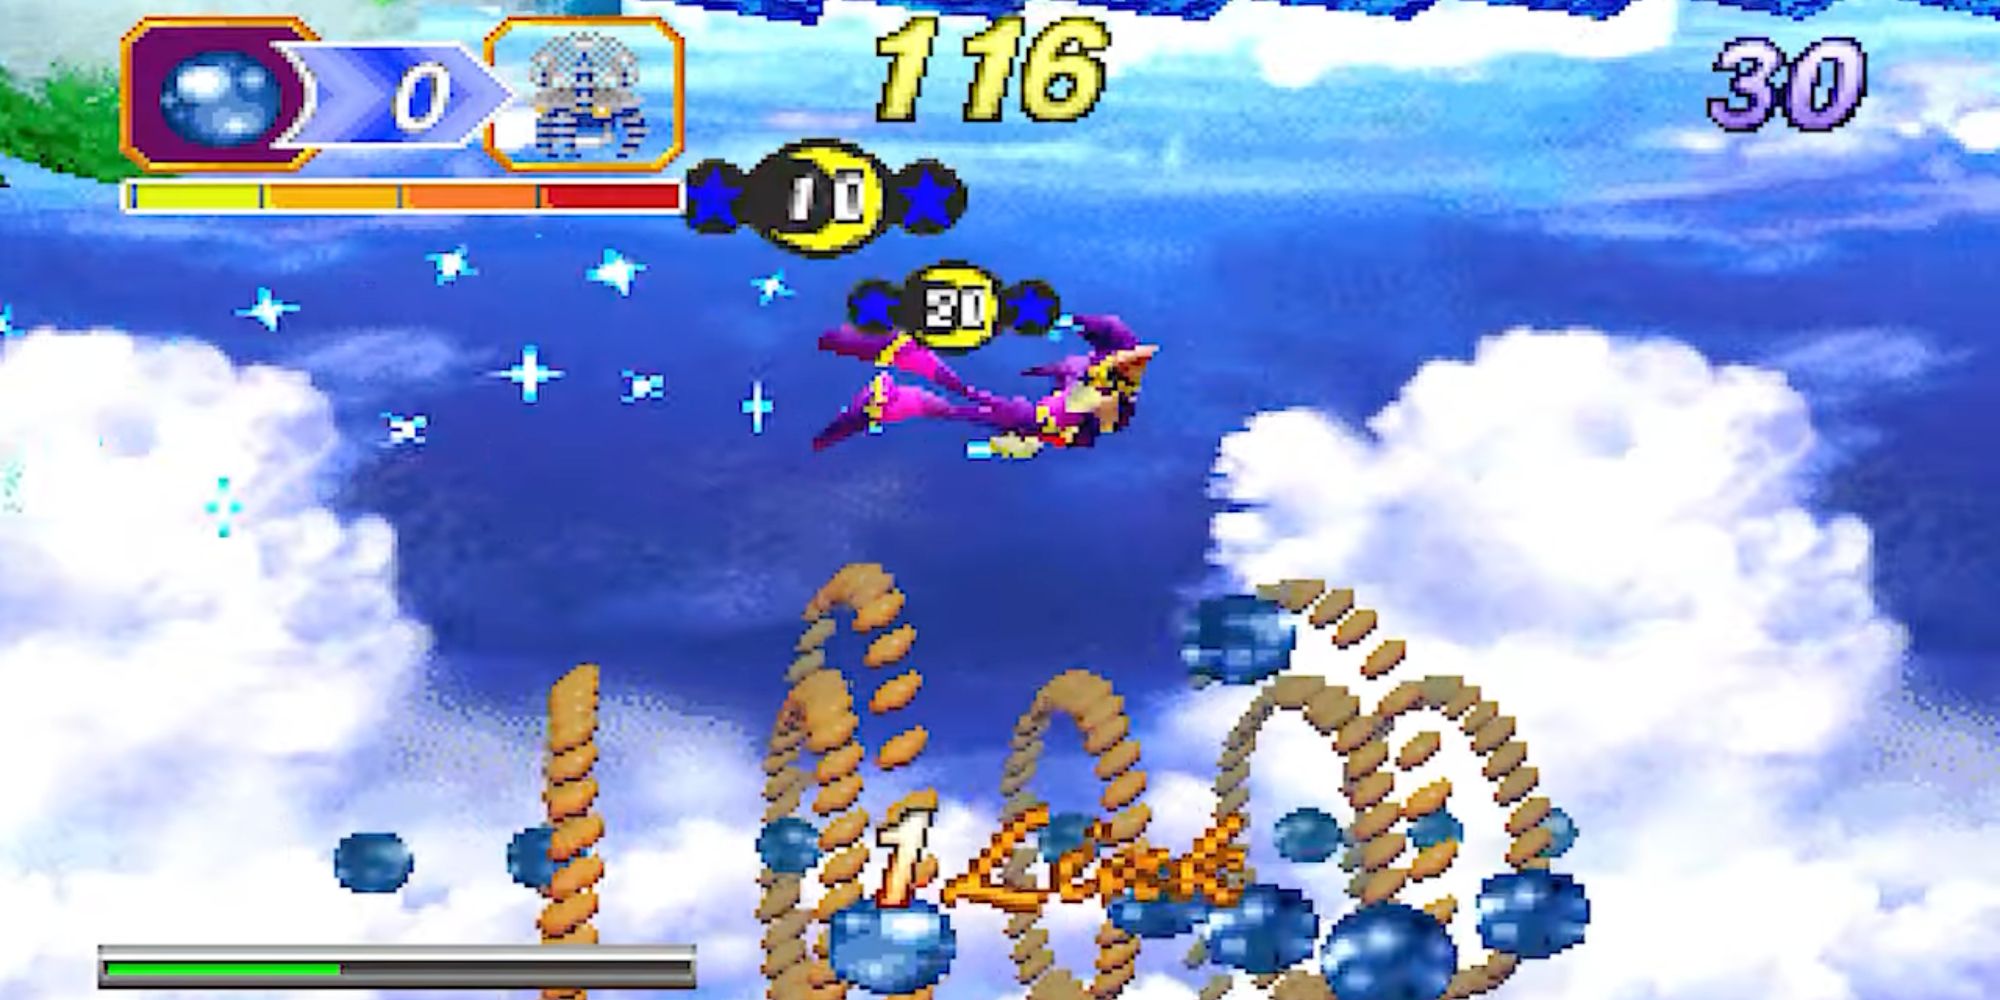 A screenshot of Nights Into Dreams for the Saturn, showing Nights flying through a blue sky and grabbing collectibles